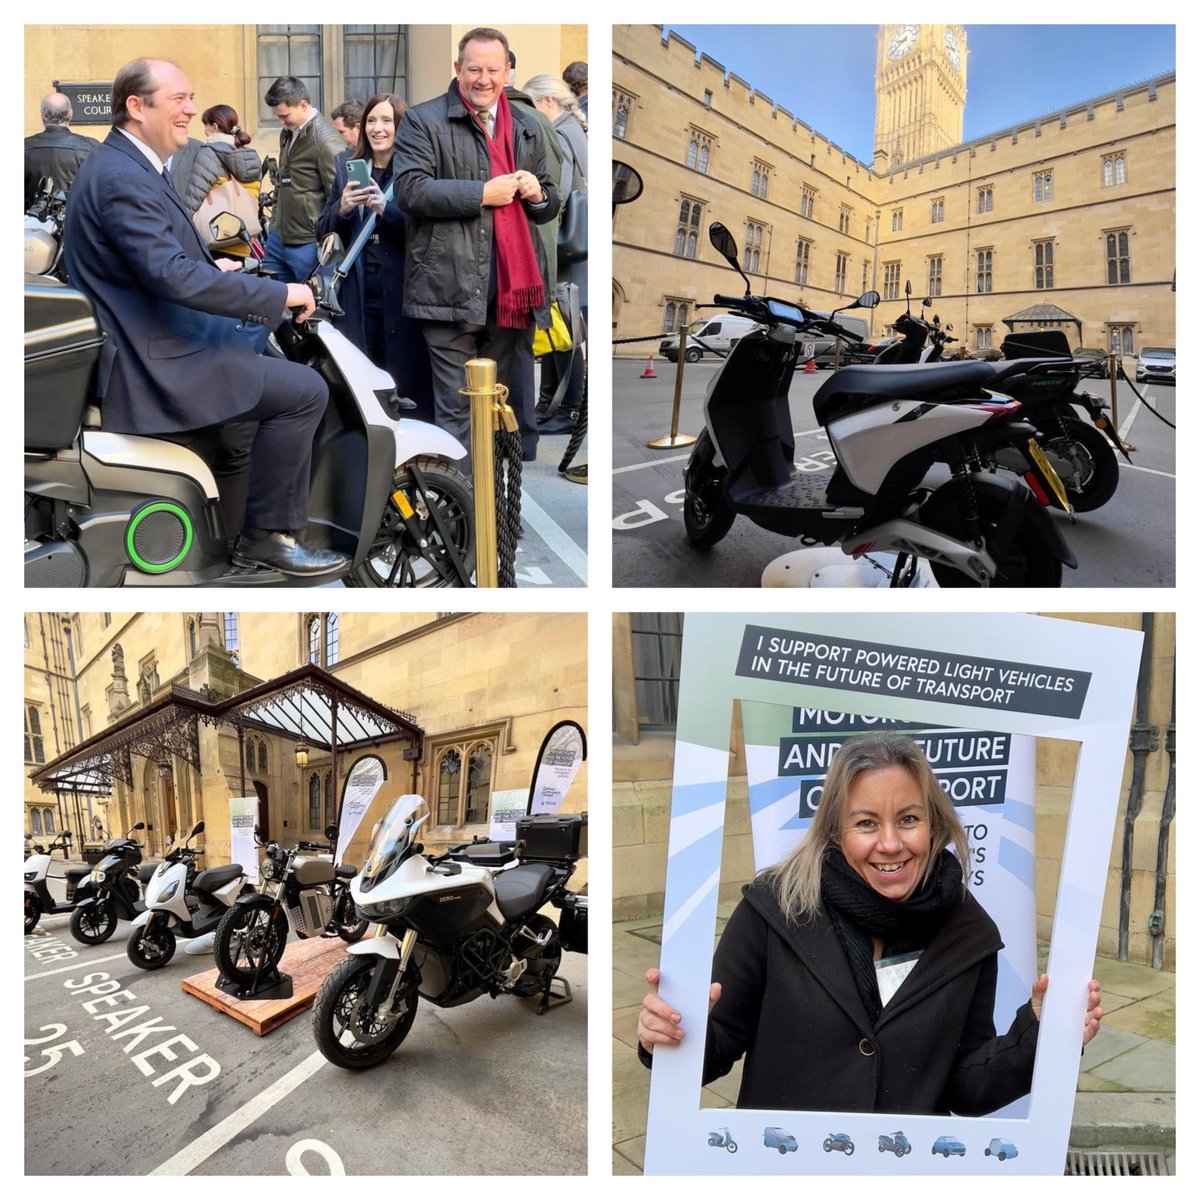 It's not everyday that the Spyder Team head off to Parliament. 

Today we have been involved in transporting and supporting the @MCIATweets as they lobby outside The Houses of Parliament to promote the future of transport.  

#supportingthefutureoftransport #PLV #futuretransport